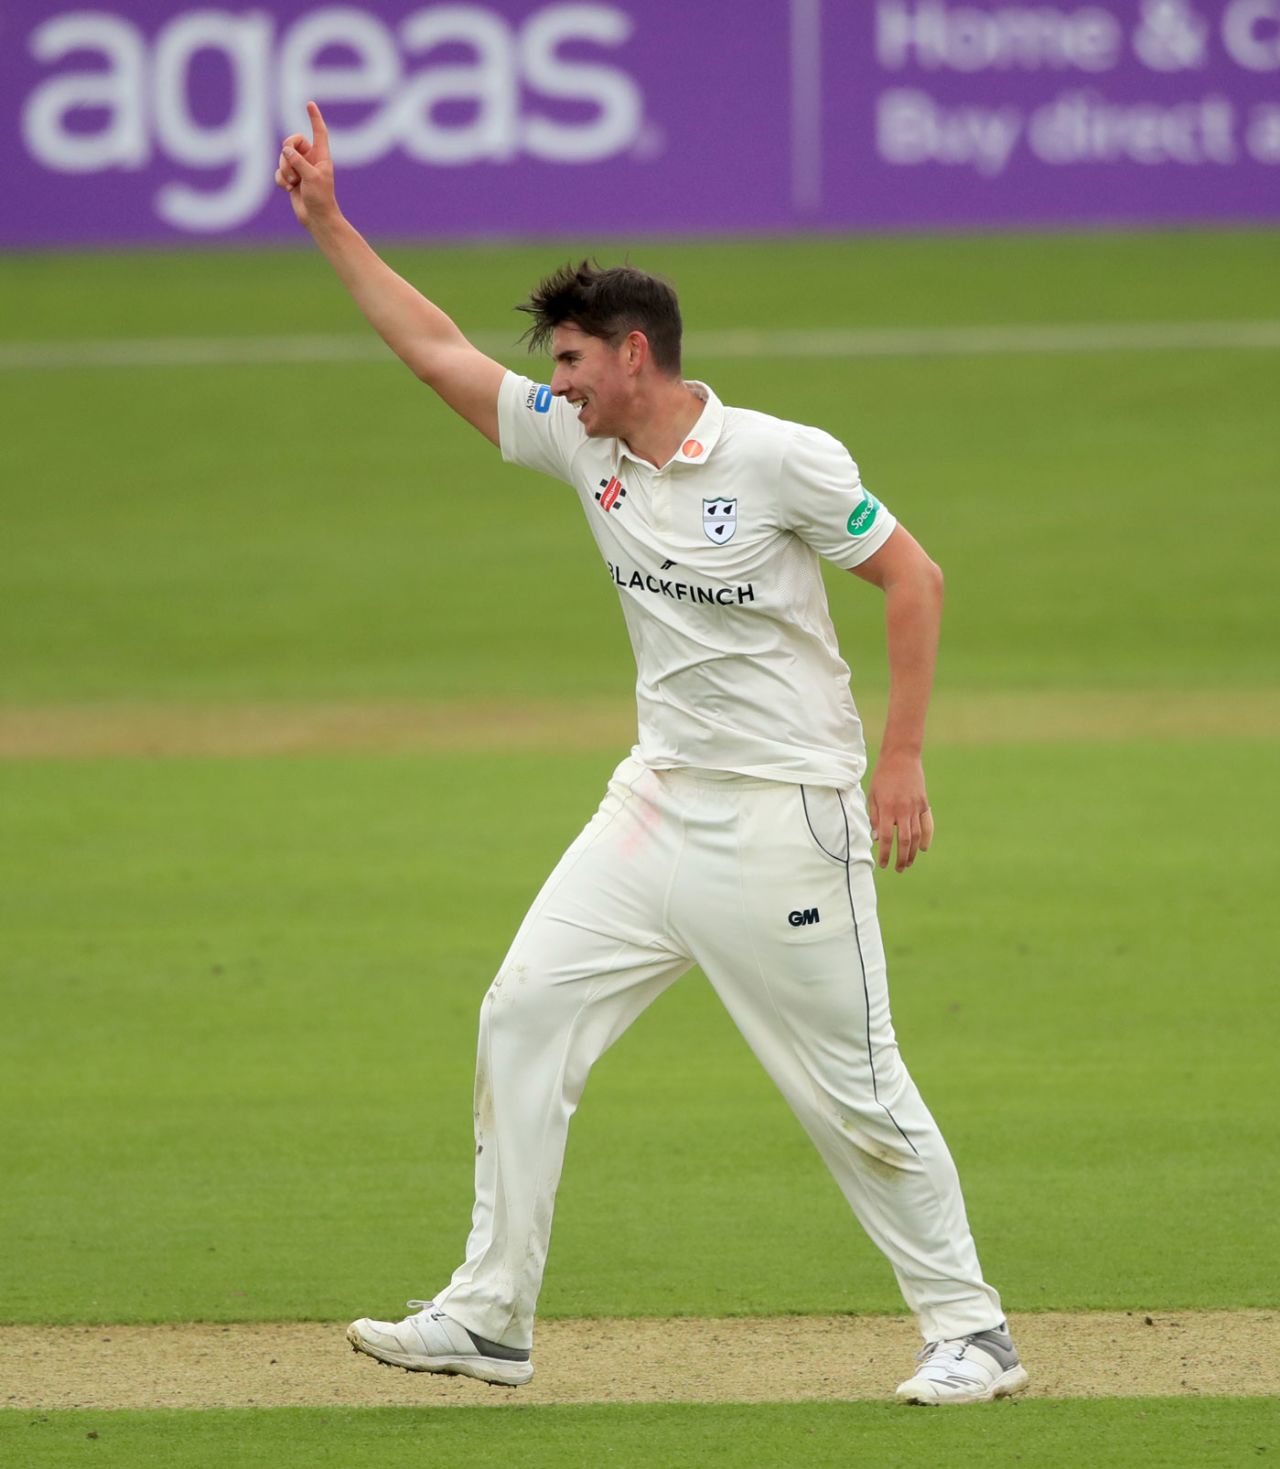 Josh Tongue celebrates a wicket, County Championship, Division One, Hampshire v Worcestershire, Ageas Bowl, 1st day, April 13, 2018